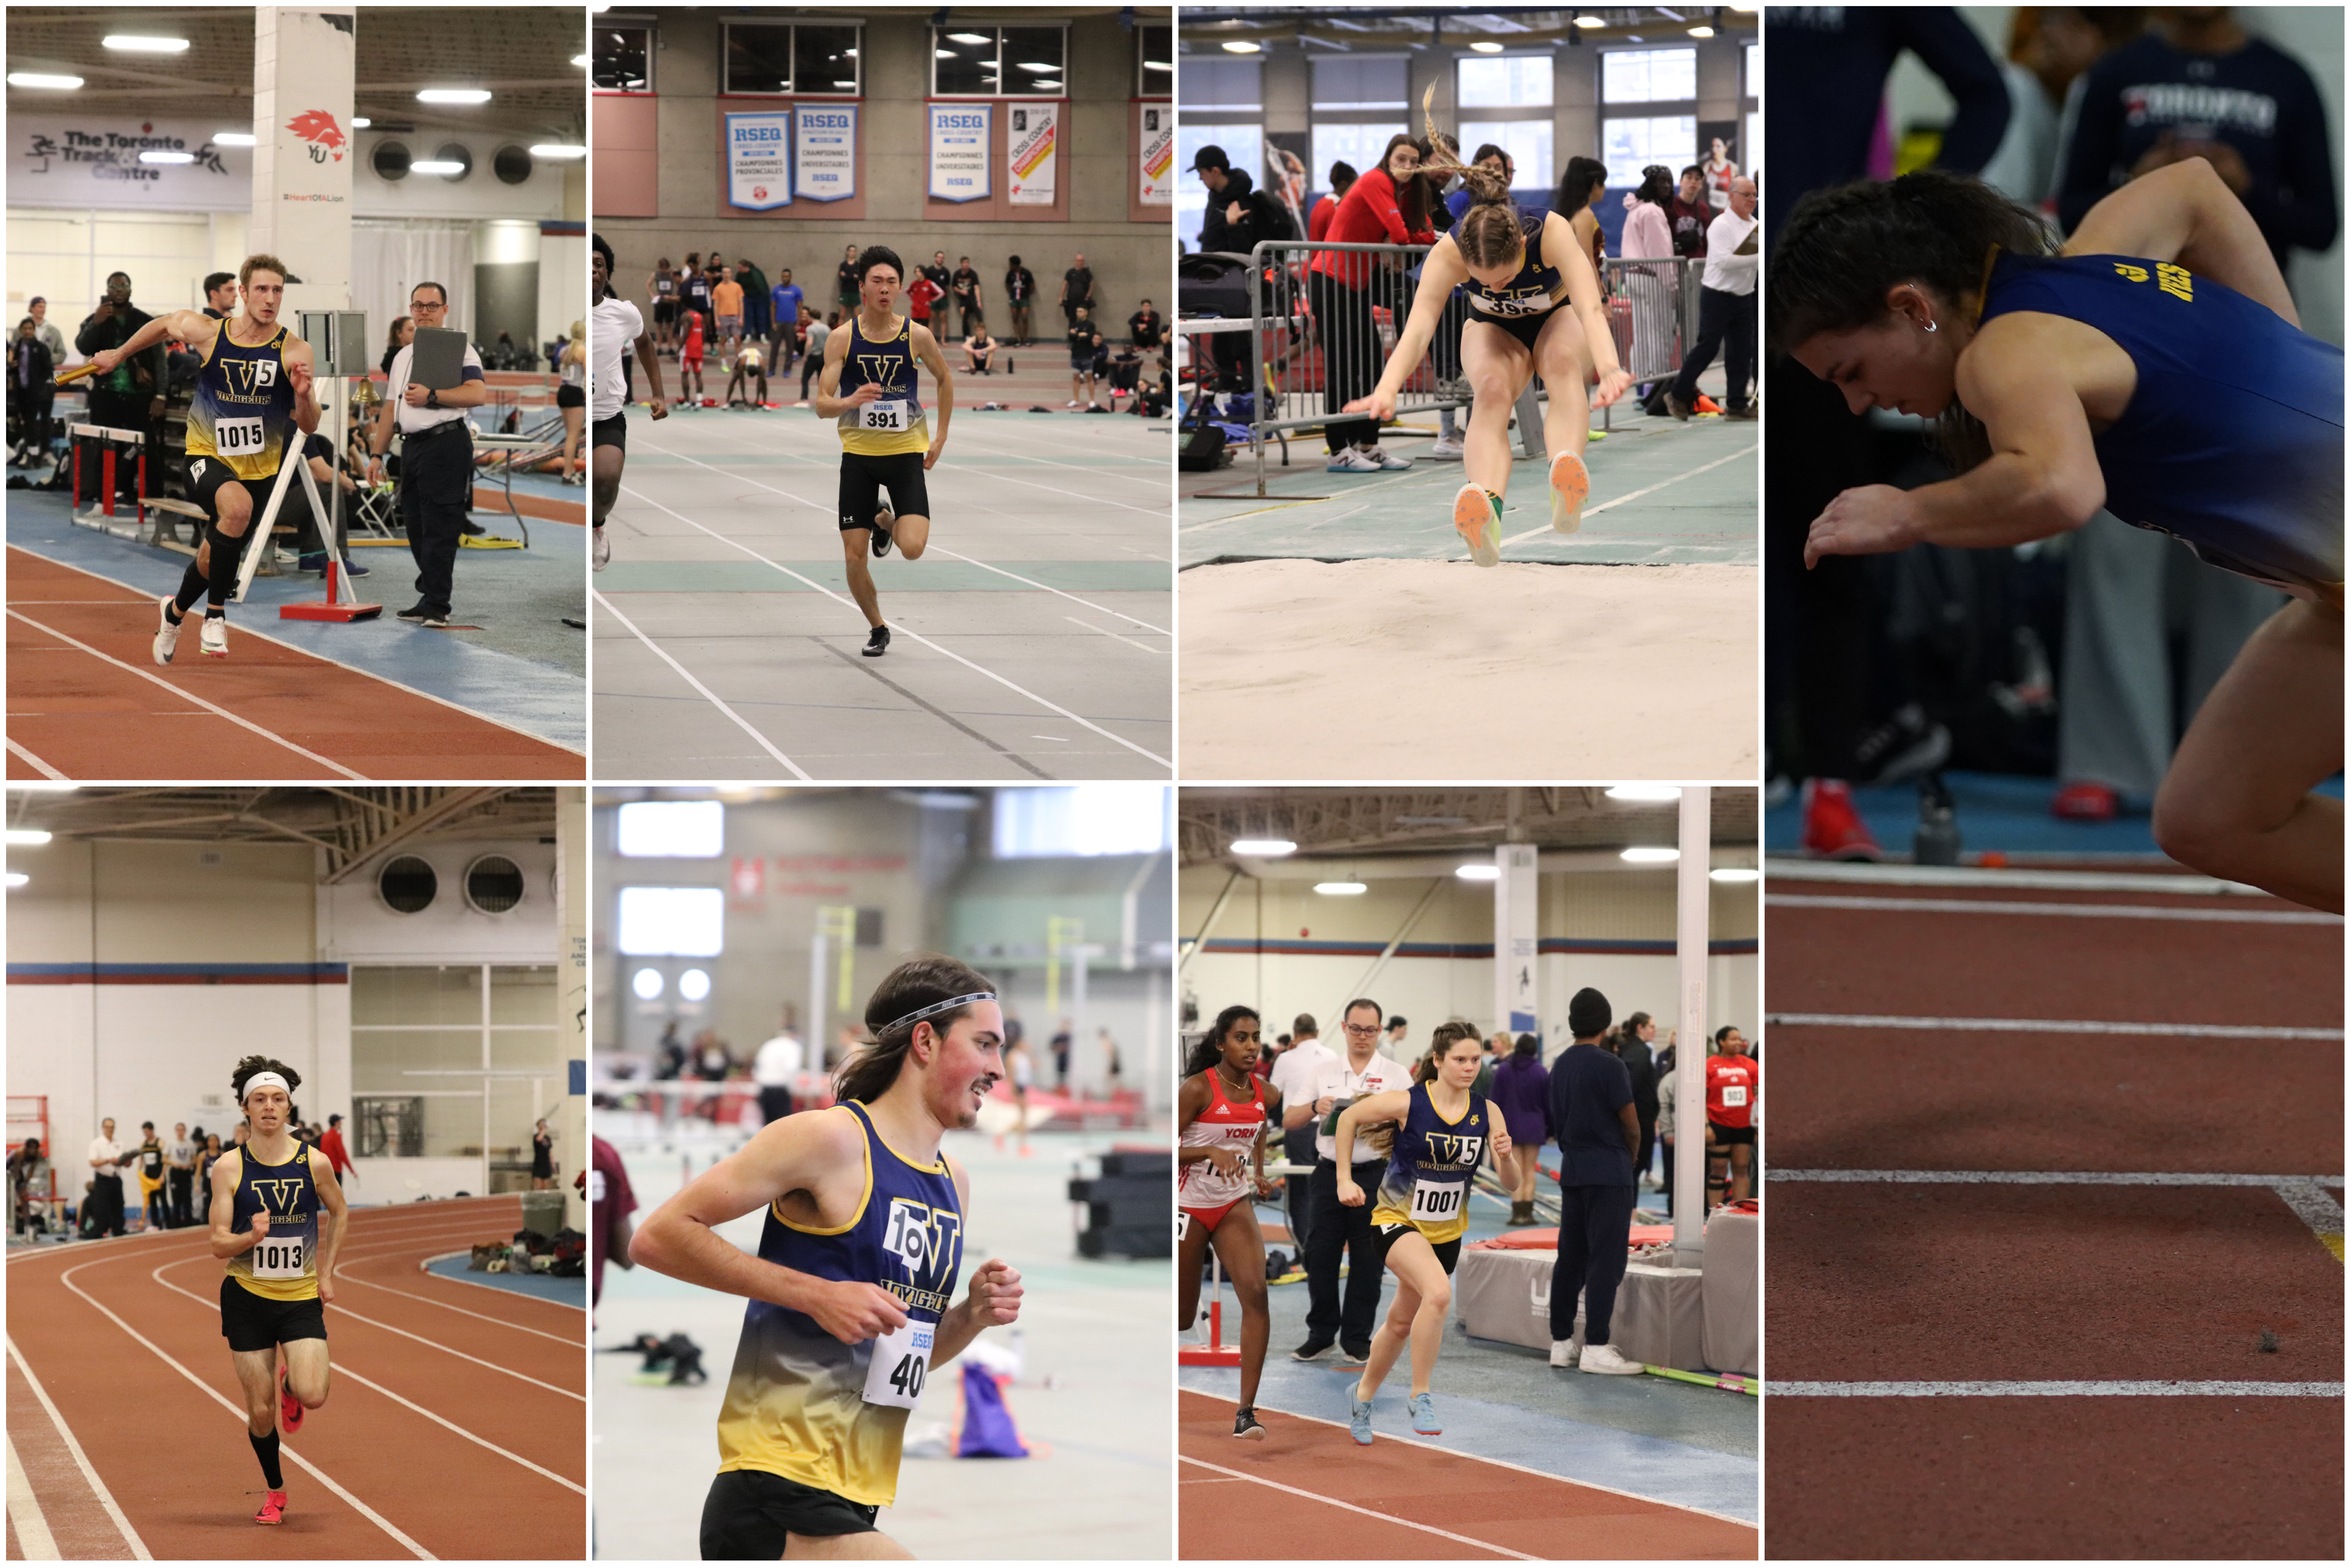 Seven athletes competing at the OUA Championships - Abby Lanteigne